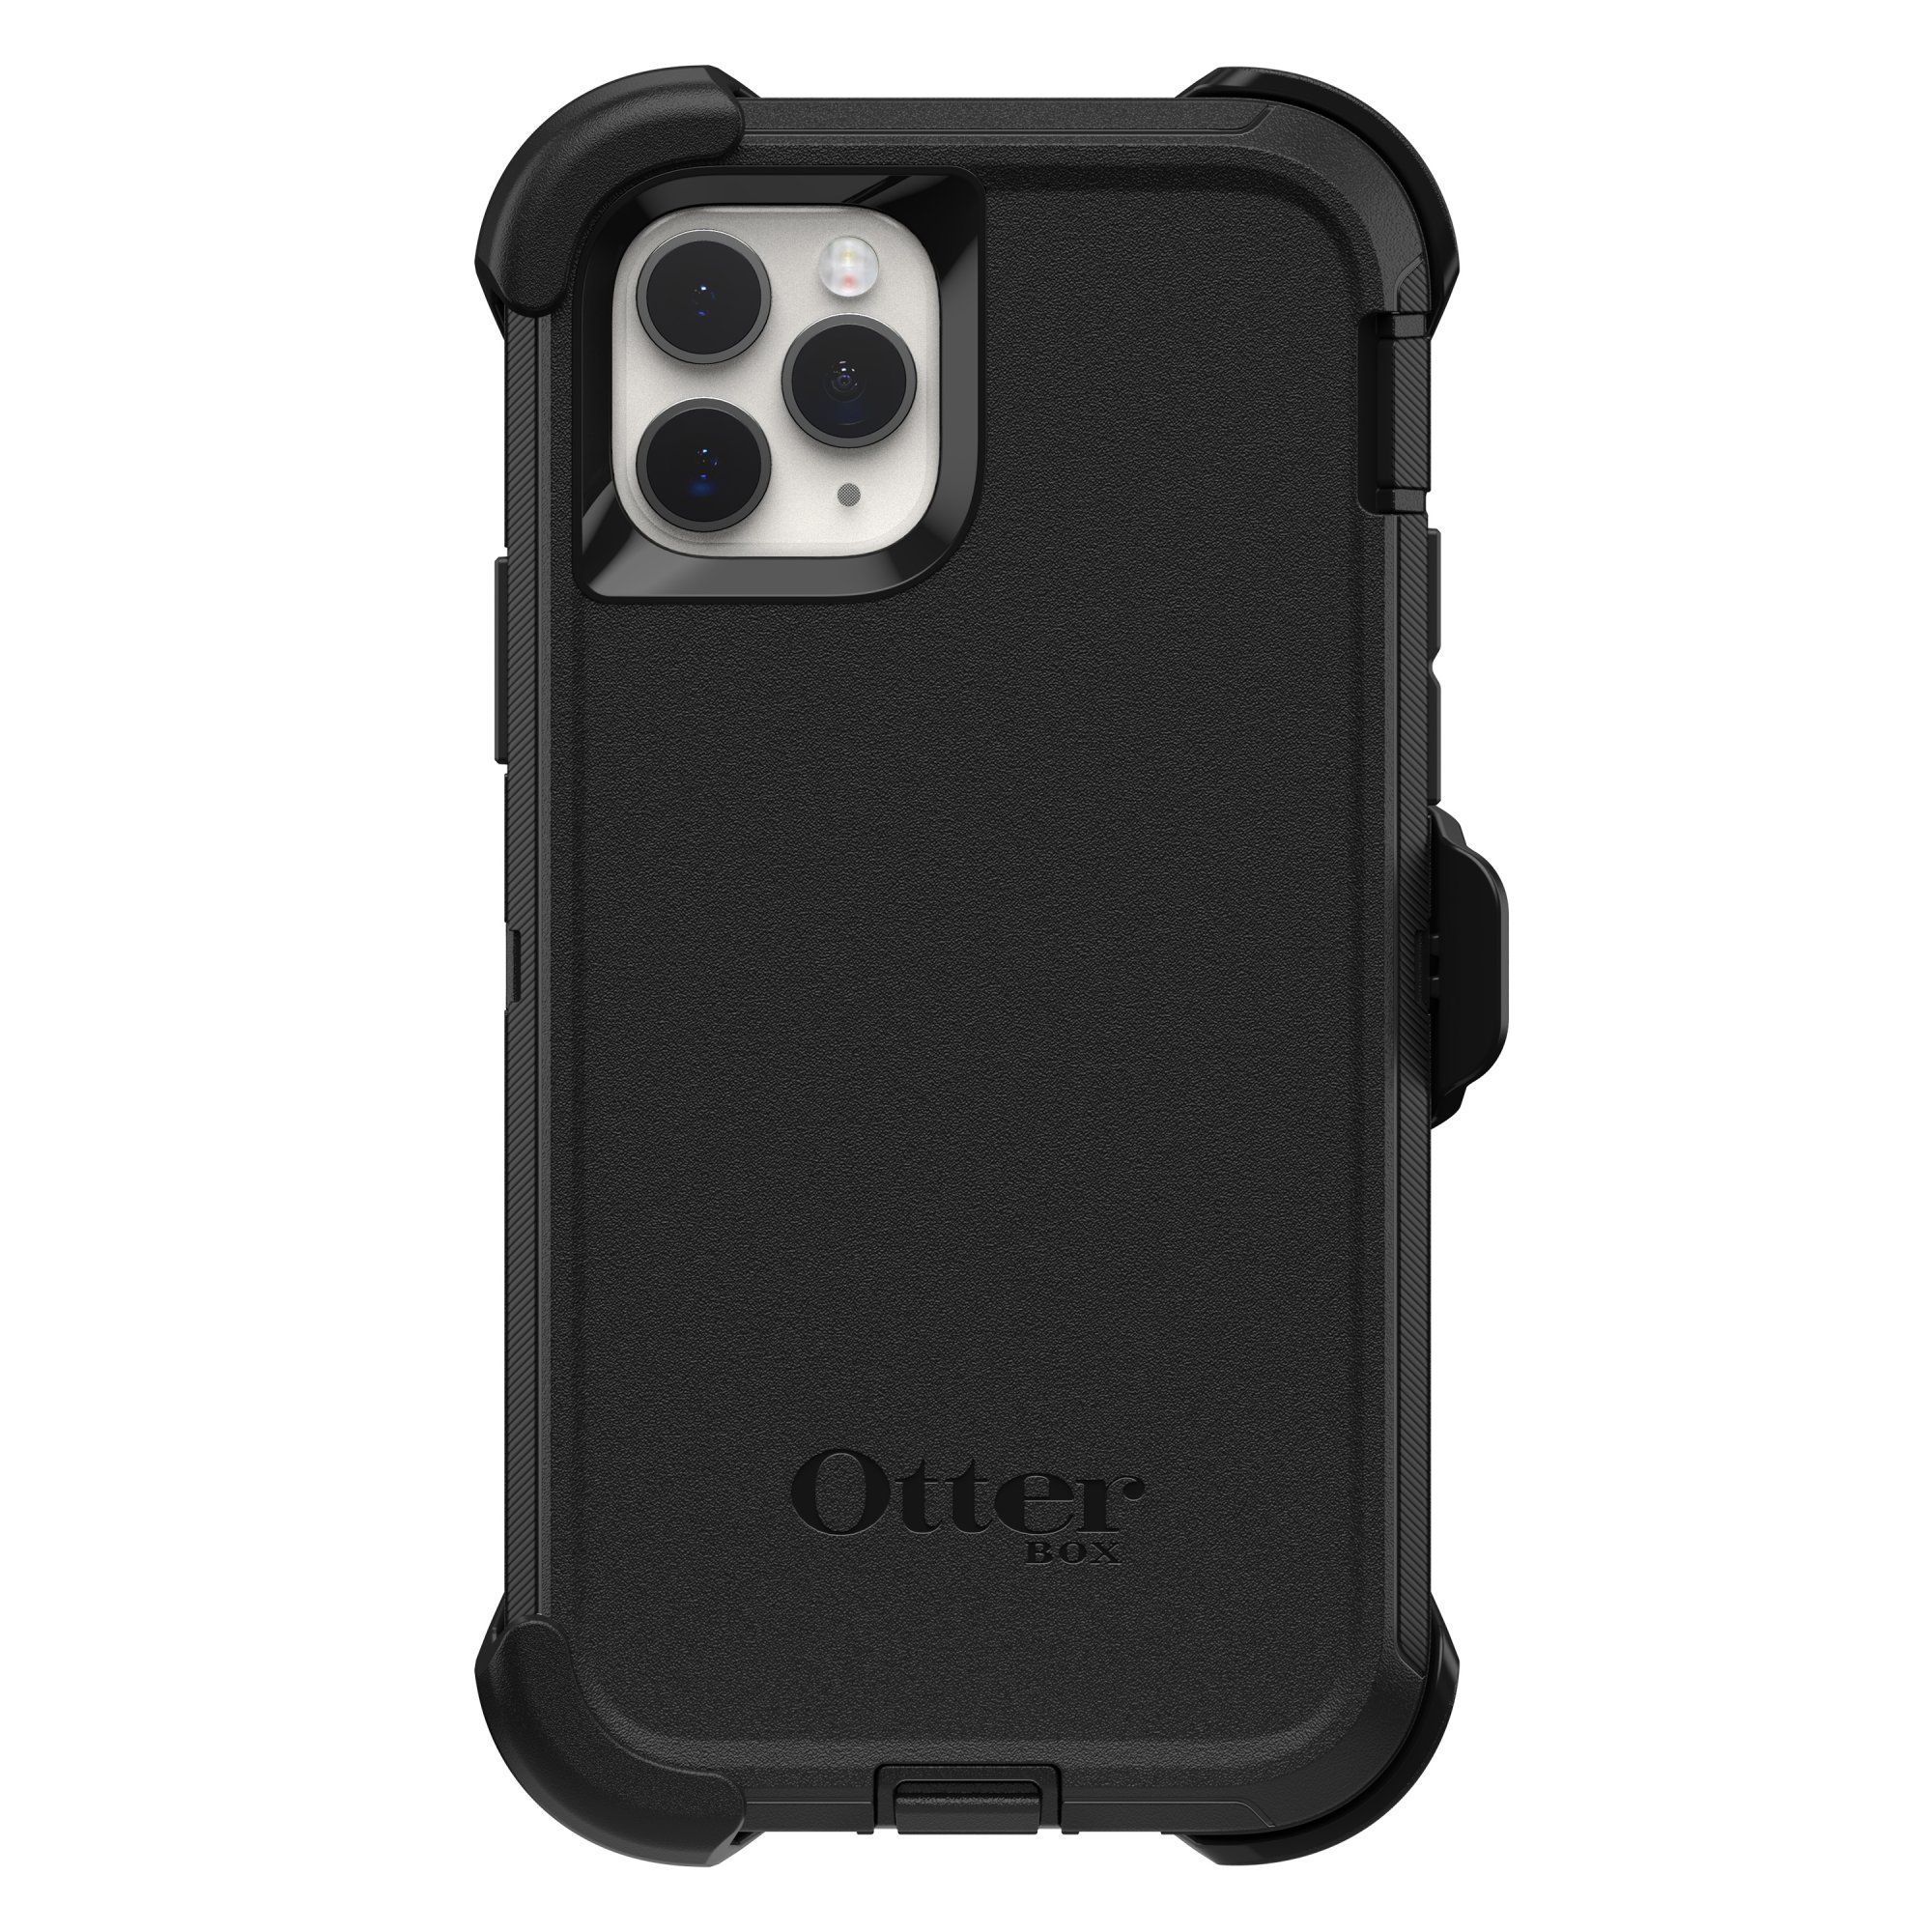 Otterbox | OtterBox Defender Series for Apple iPhone 11 Pro, black